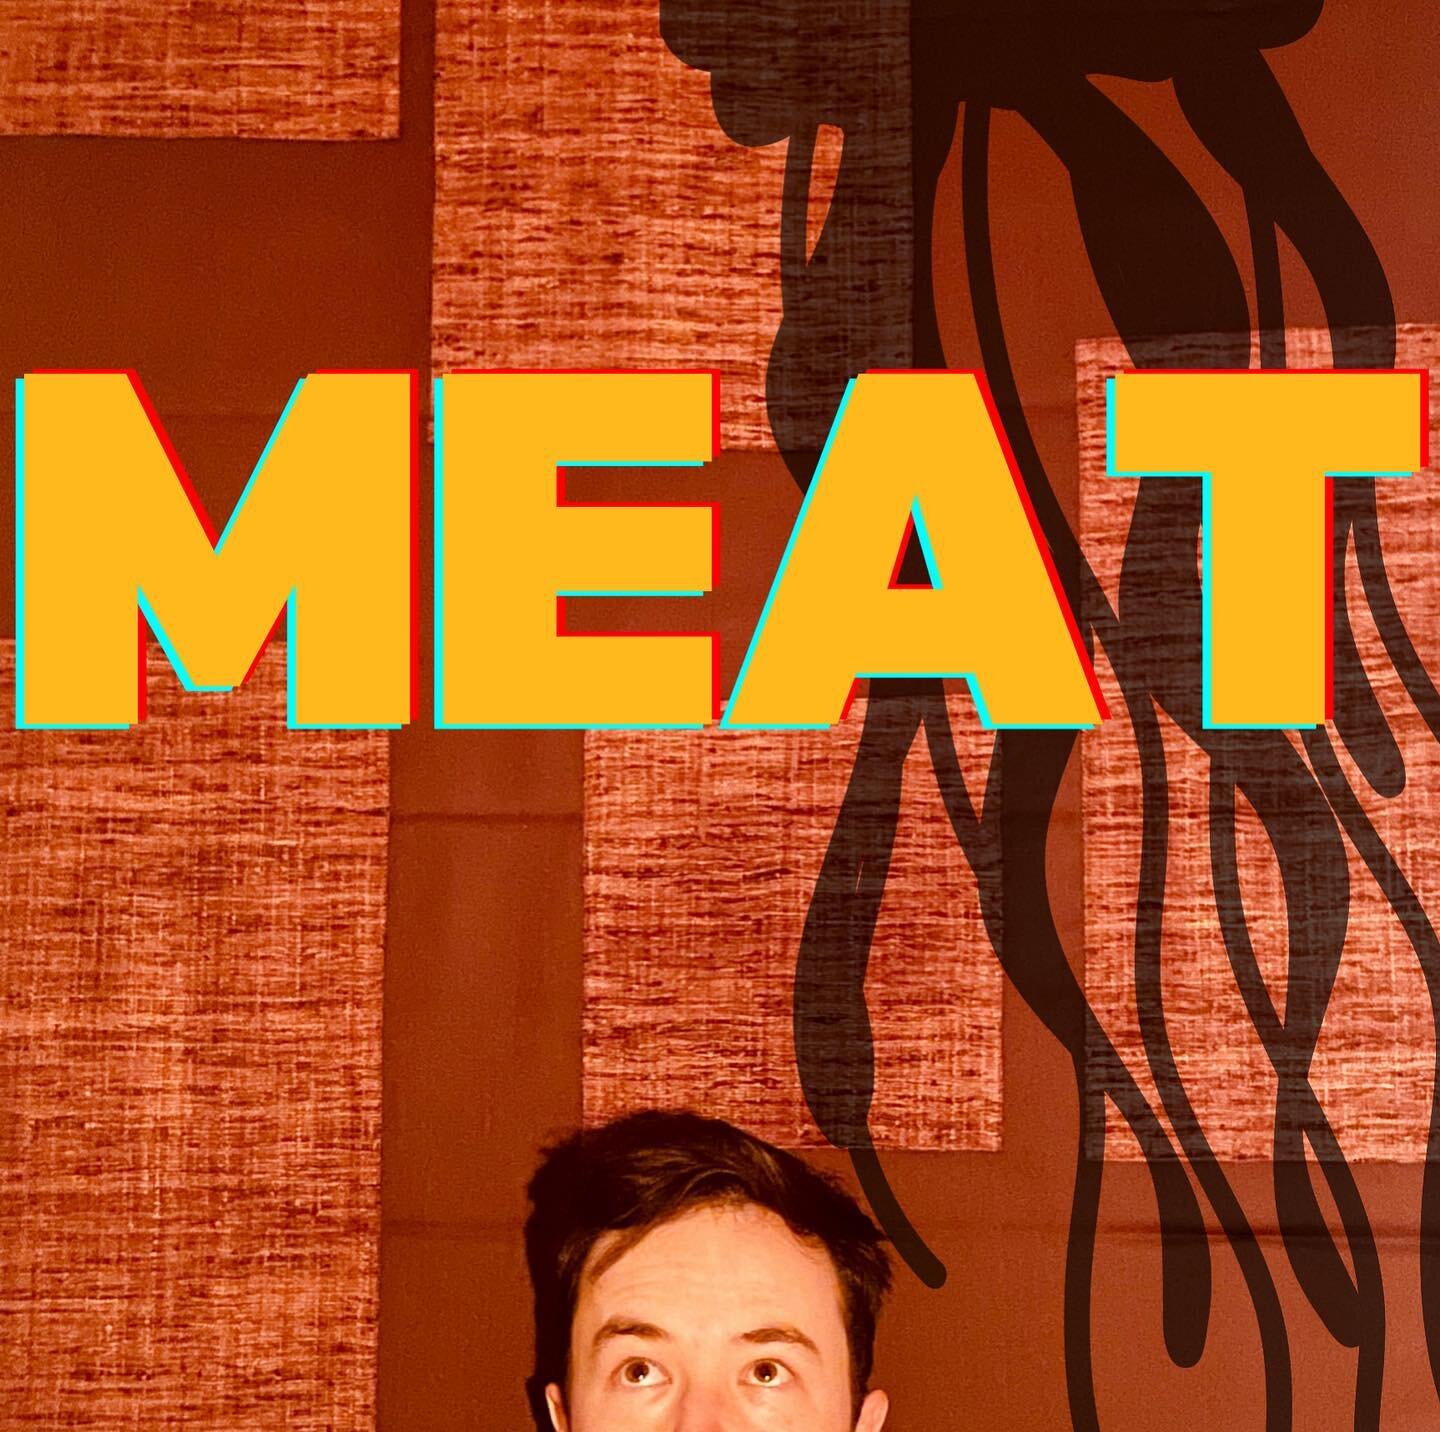 The chicken of the sea?

MEAT comes to the Tank Dec 9, 10, 16, &amp; 17
Link in bio for tickets, on sale now

OTHER UPCOMING EVENTS:
NYC Fundraiser Nov 22 (TOMORROW!) @ 7:00 pm, Von Bar
Happy Hour prices until 9:30